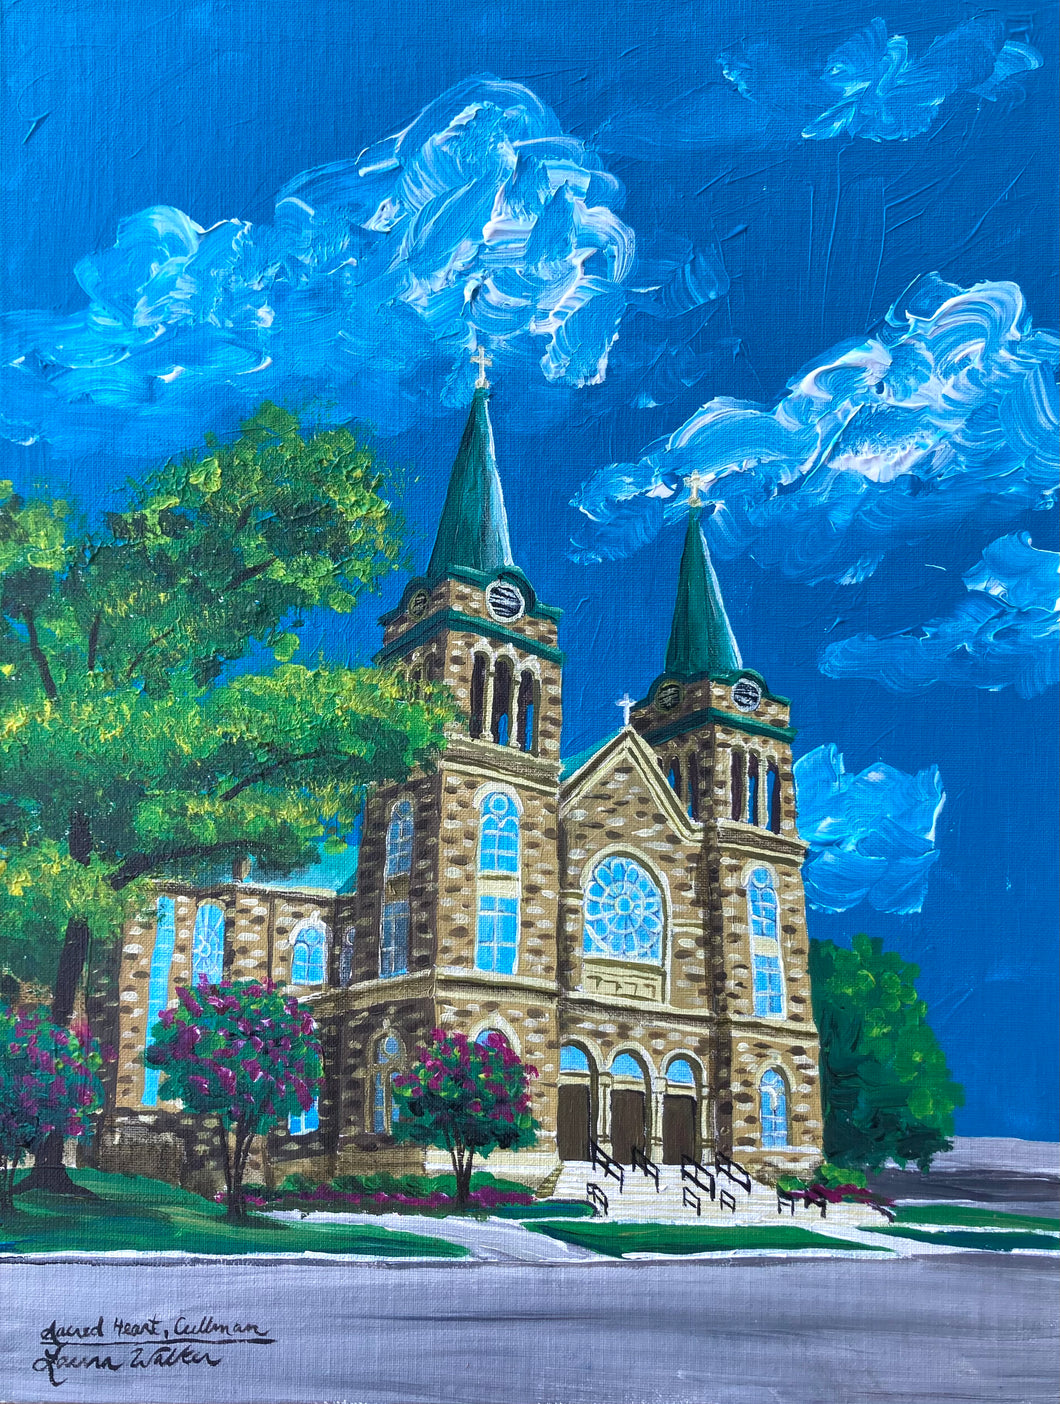 20x24, church, business, wedding venue, university building Made to order, acrylic painting